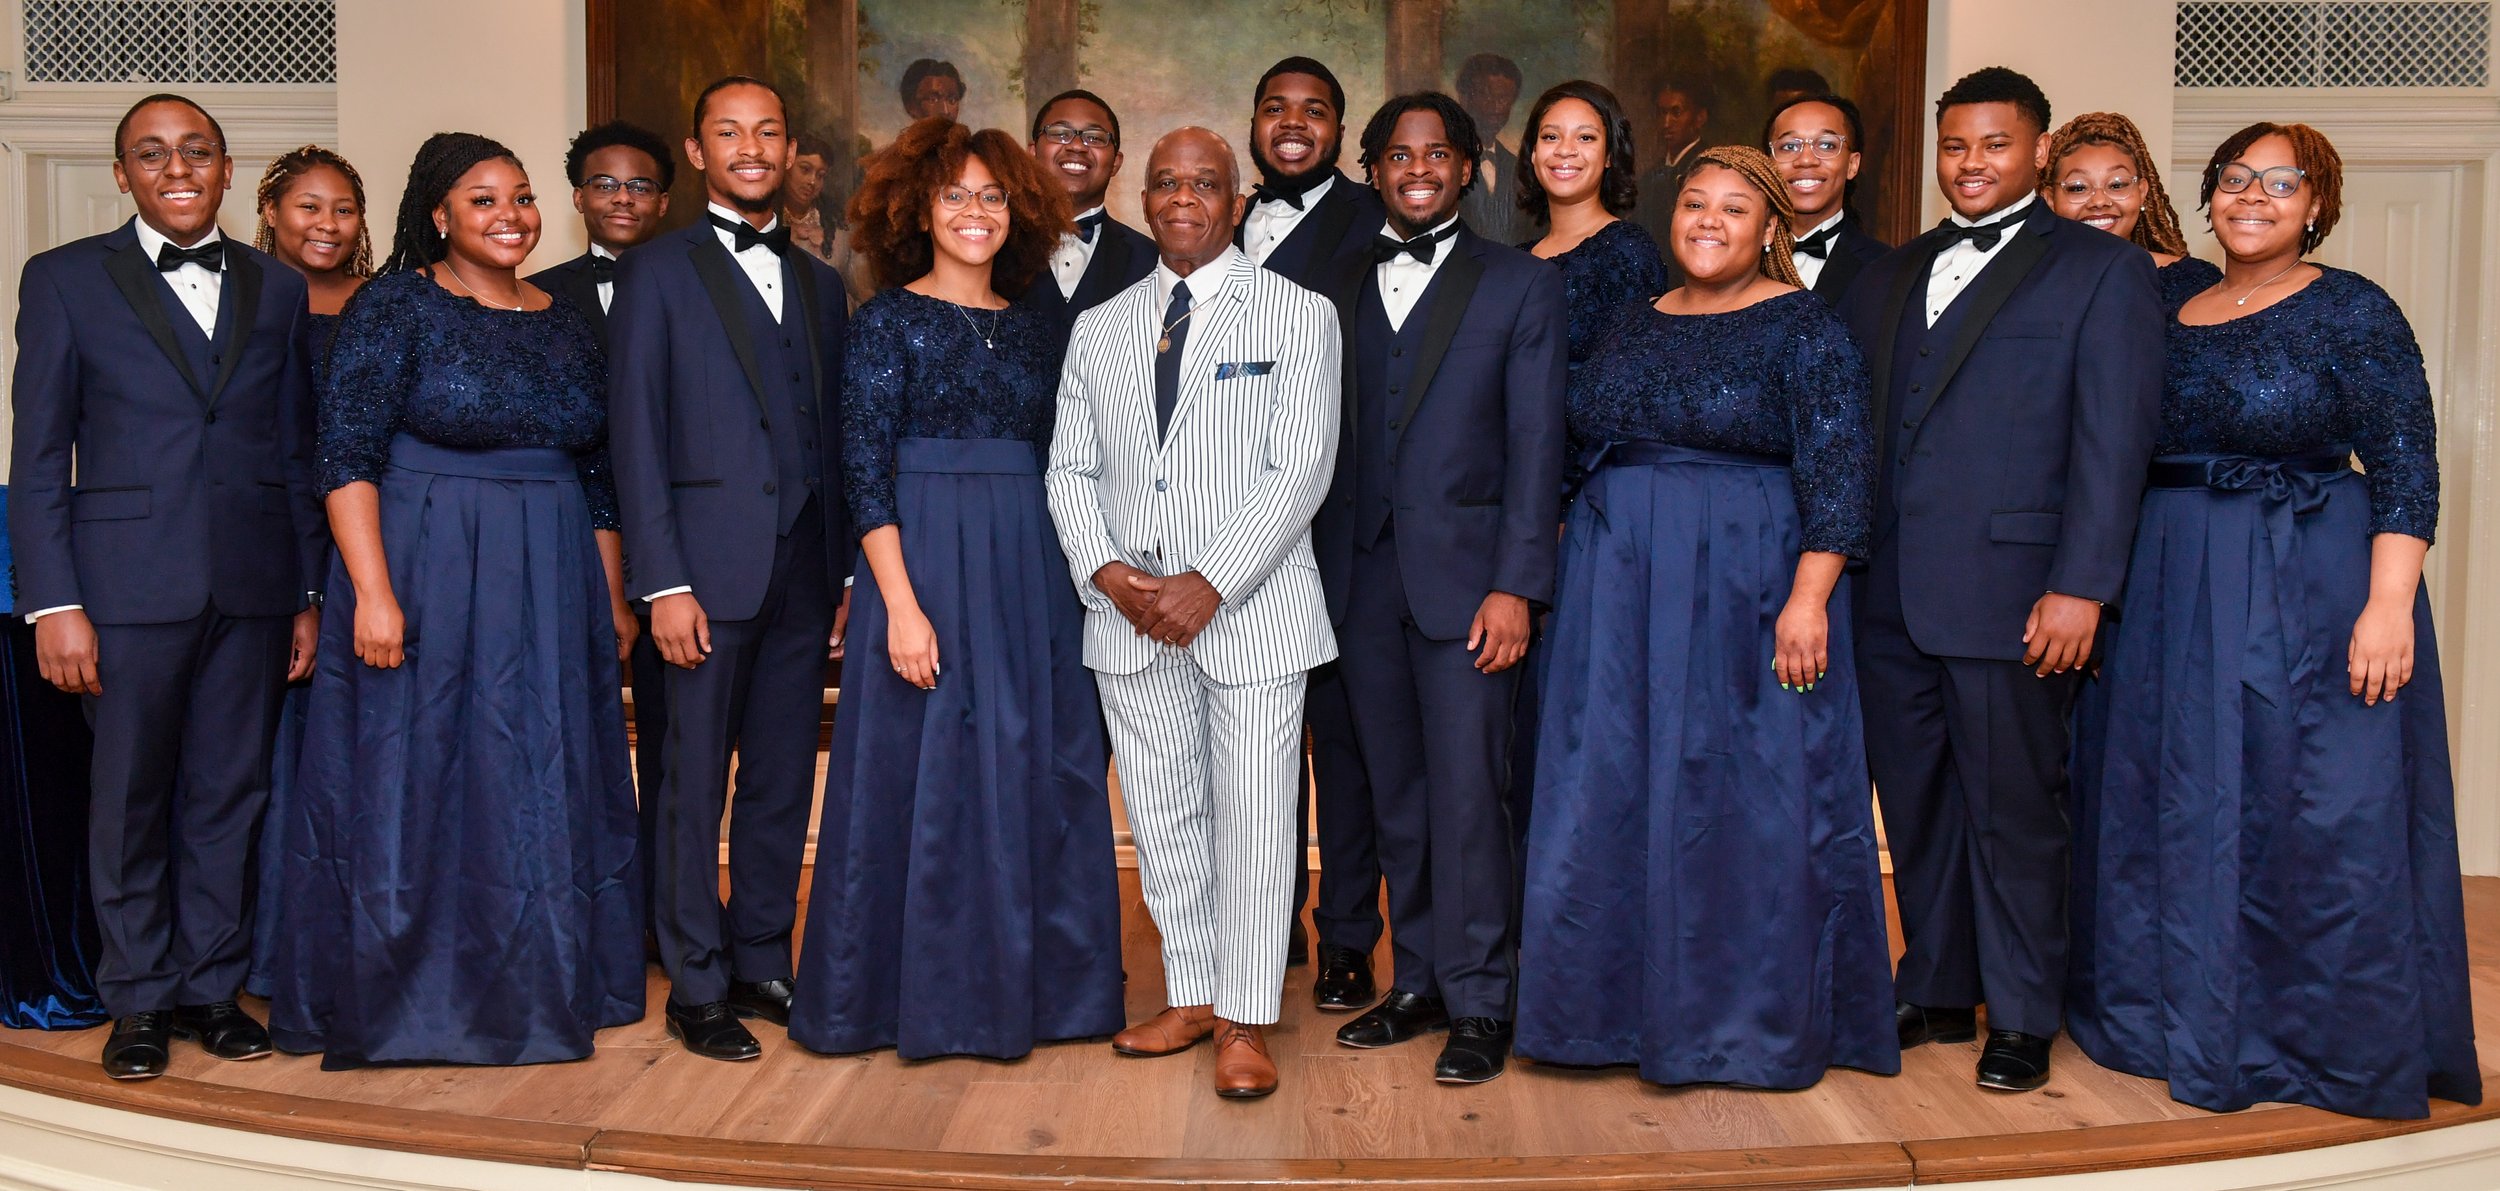 Fisk Jubilee Singers with Musical Director Dr. Paul Kwami